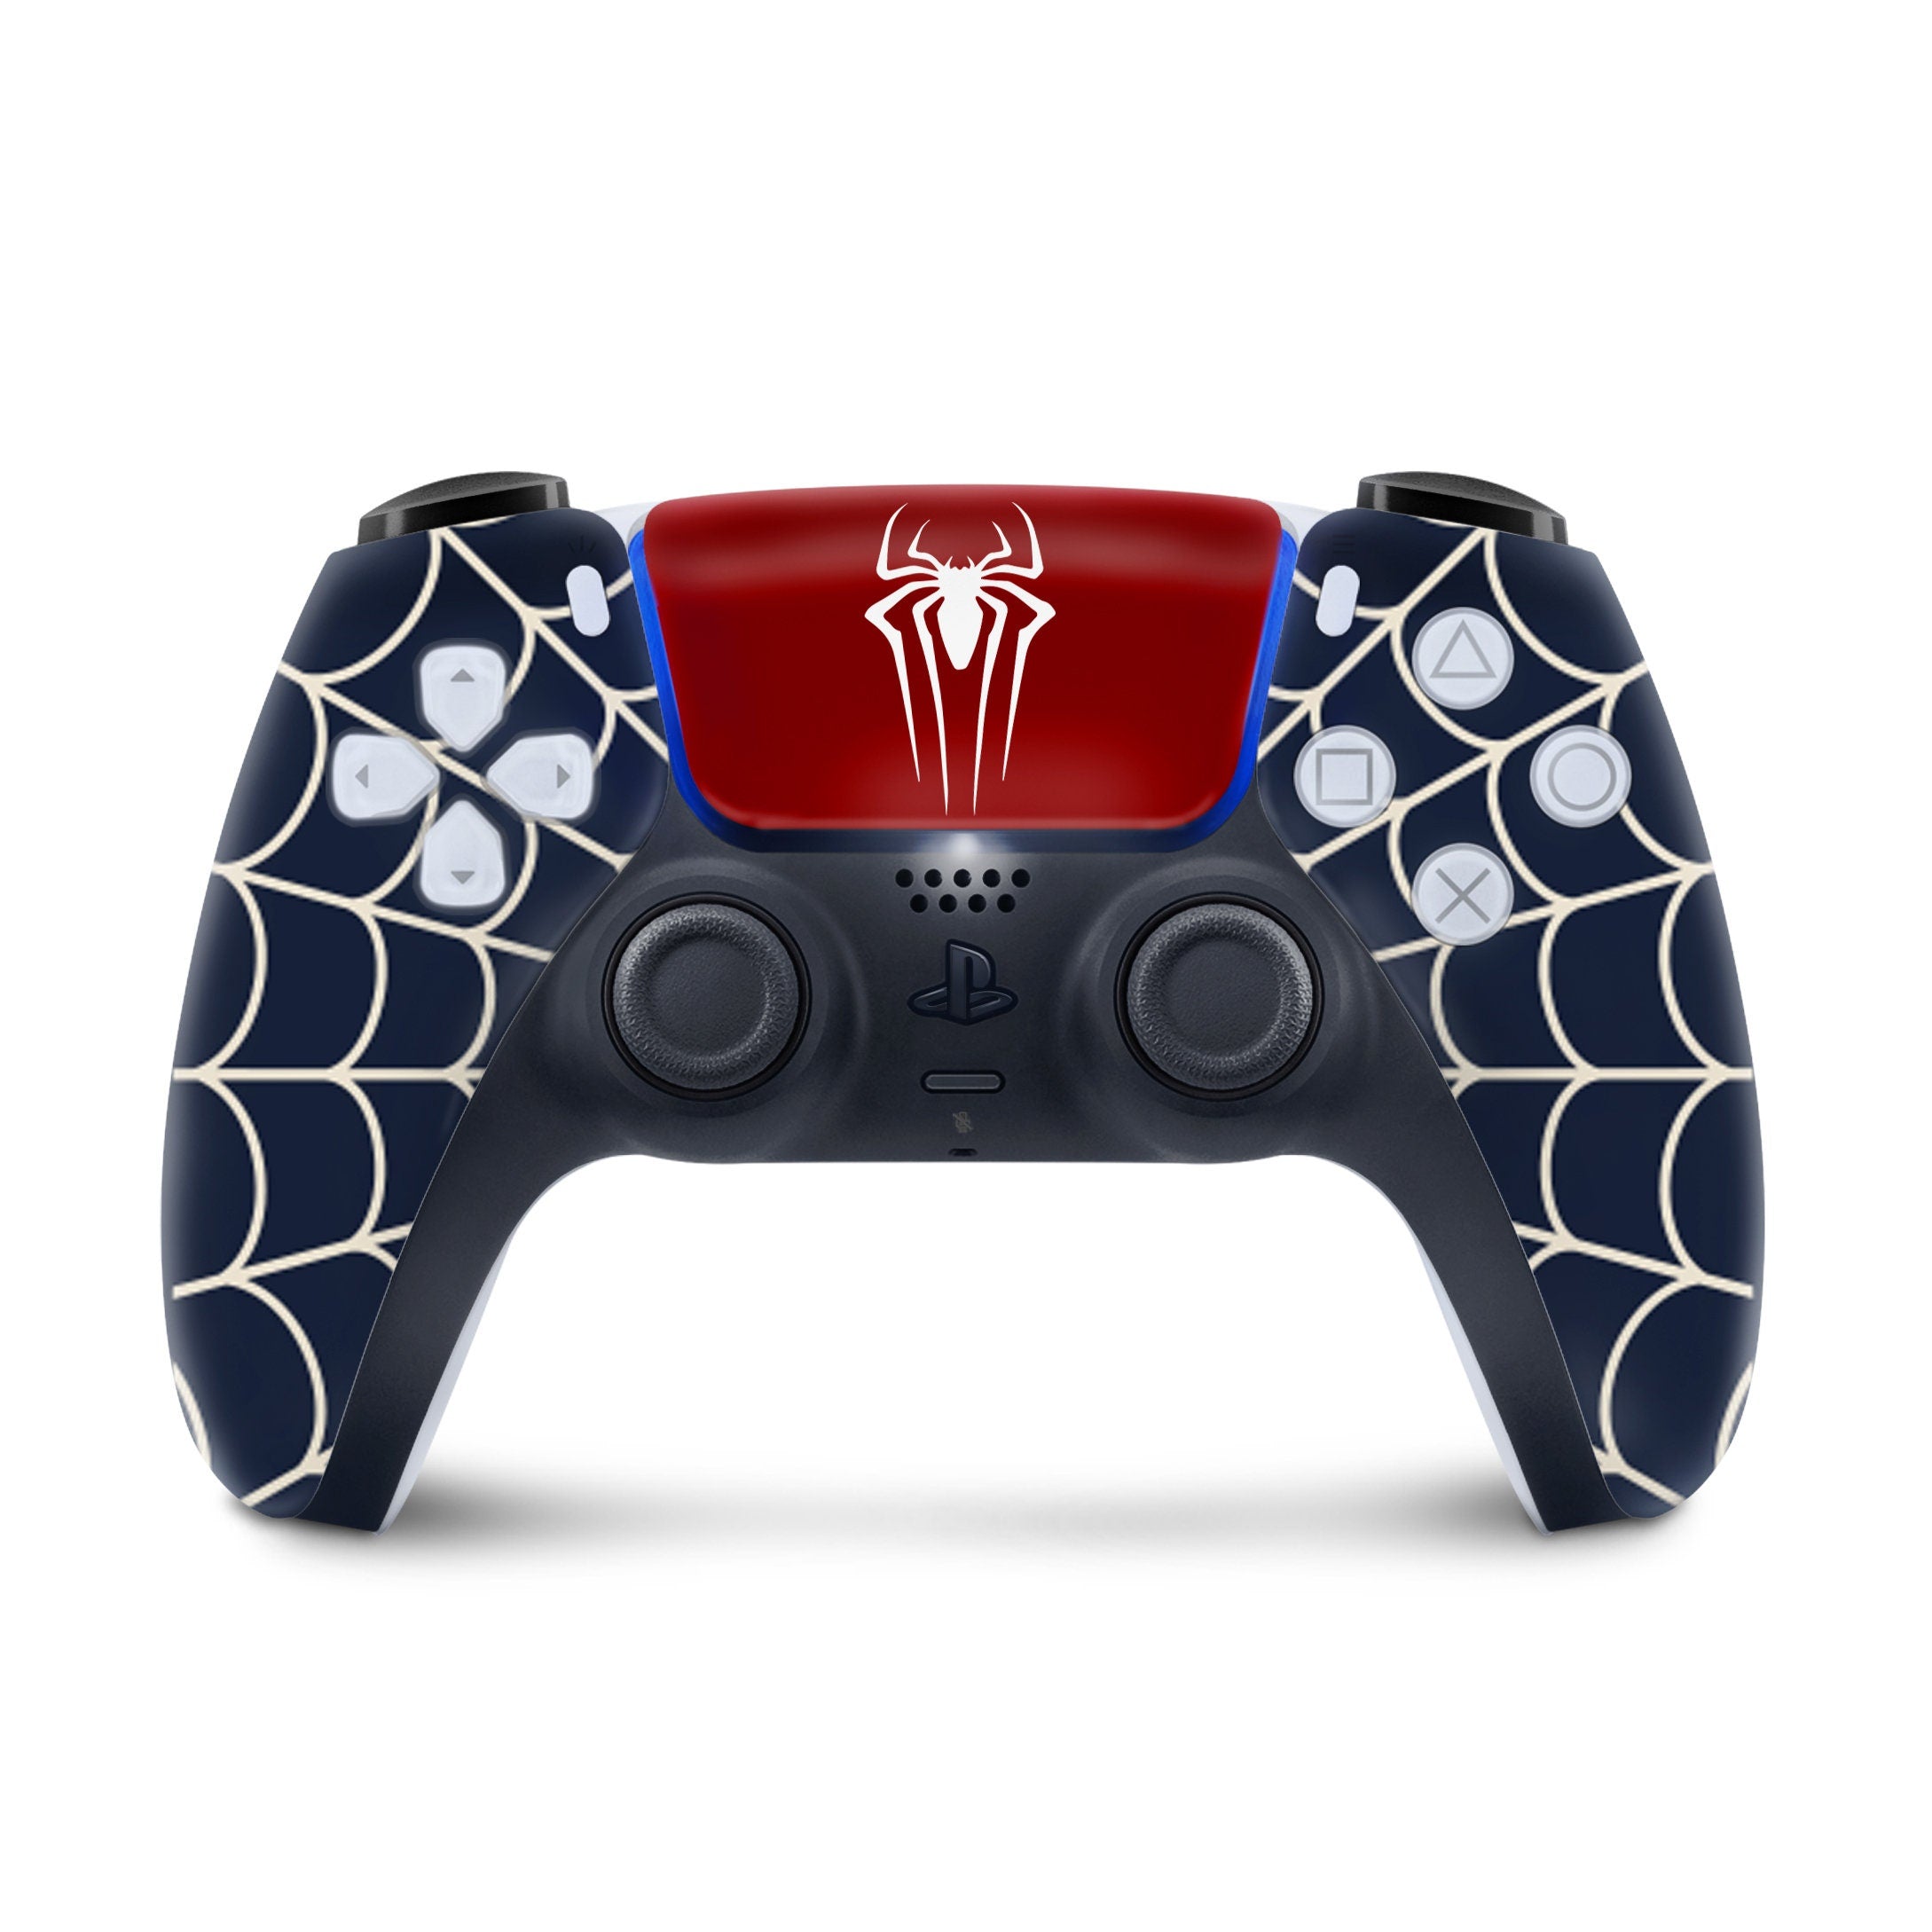  [Regular PS5 Digital Edition] - NOWSKINS Spider - Man PS5 Skin  for Playstation 5, Premium 3M Vinyl Cover Skins Wraps for PS5 Digital  Edition and PS5 Controller Stickers : Video Games